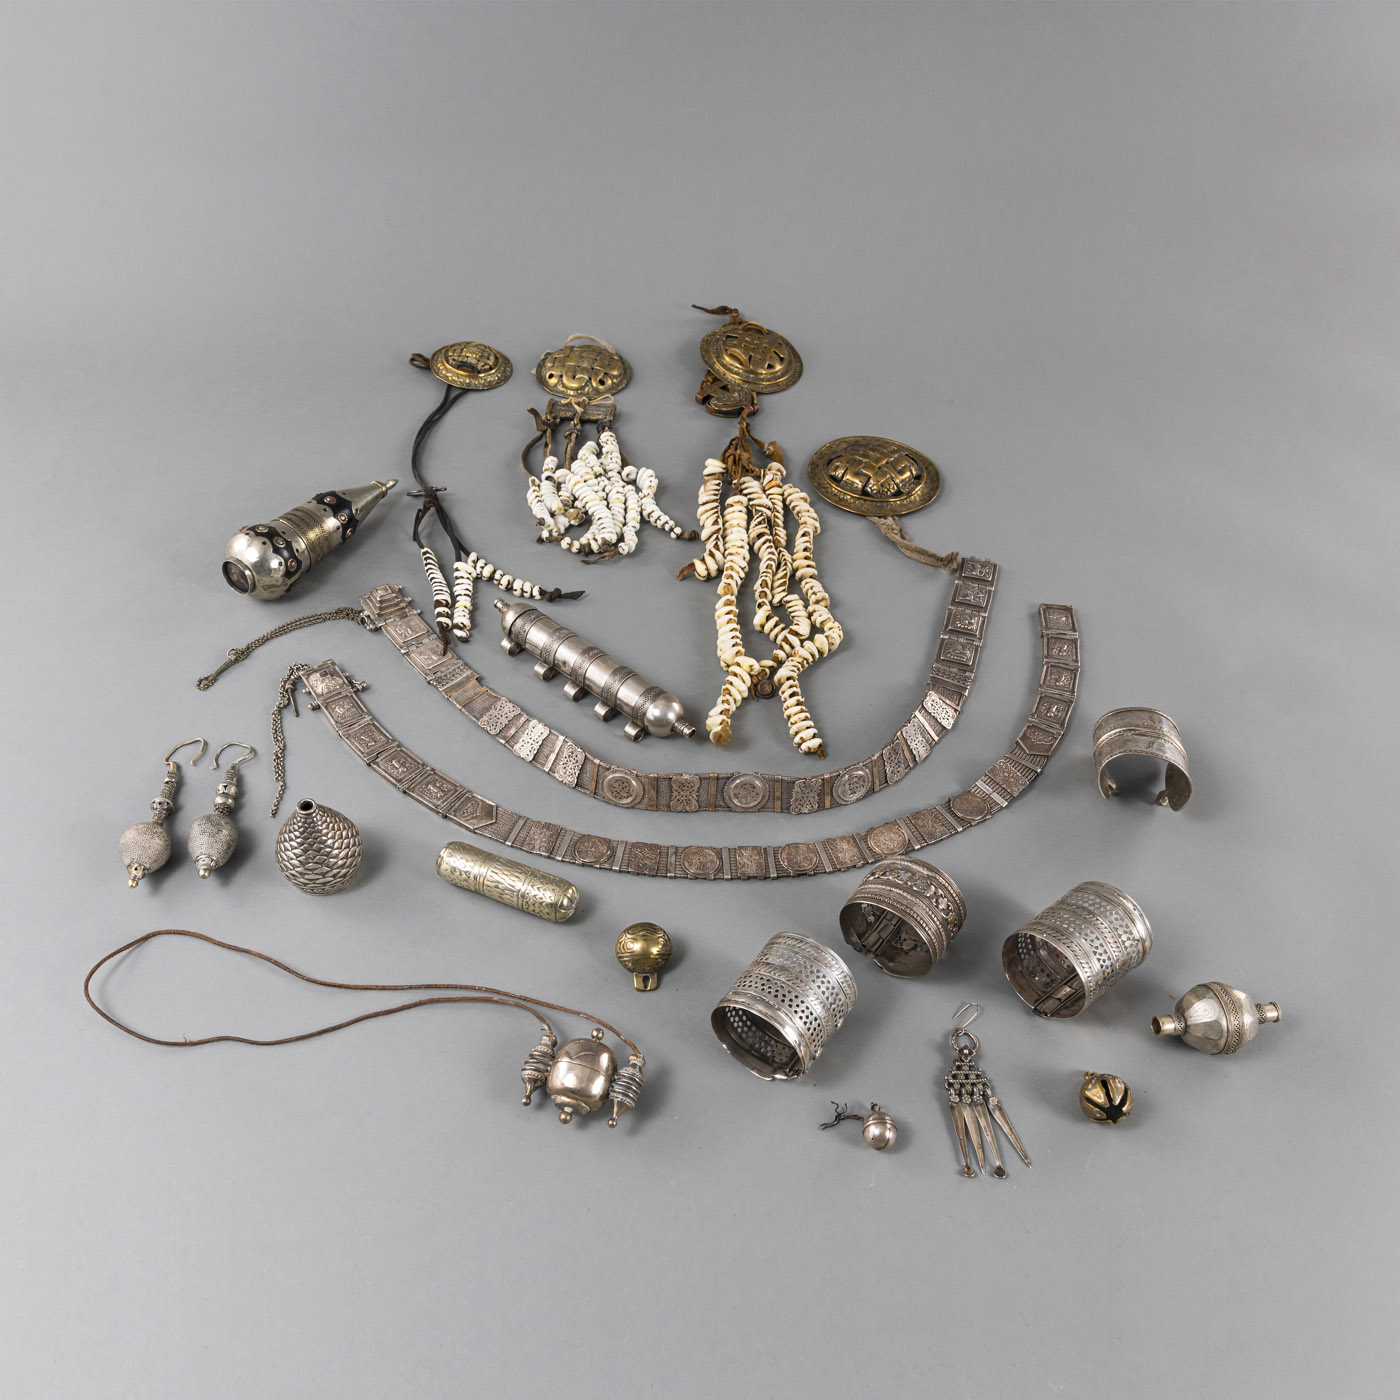 A GROUP OF 22 PIECES OF JEWELRY, PARTLY SILVER: BELTS, BRACELETS, AMULETS AND MEDALLION CHAINS